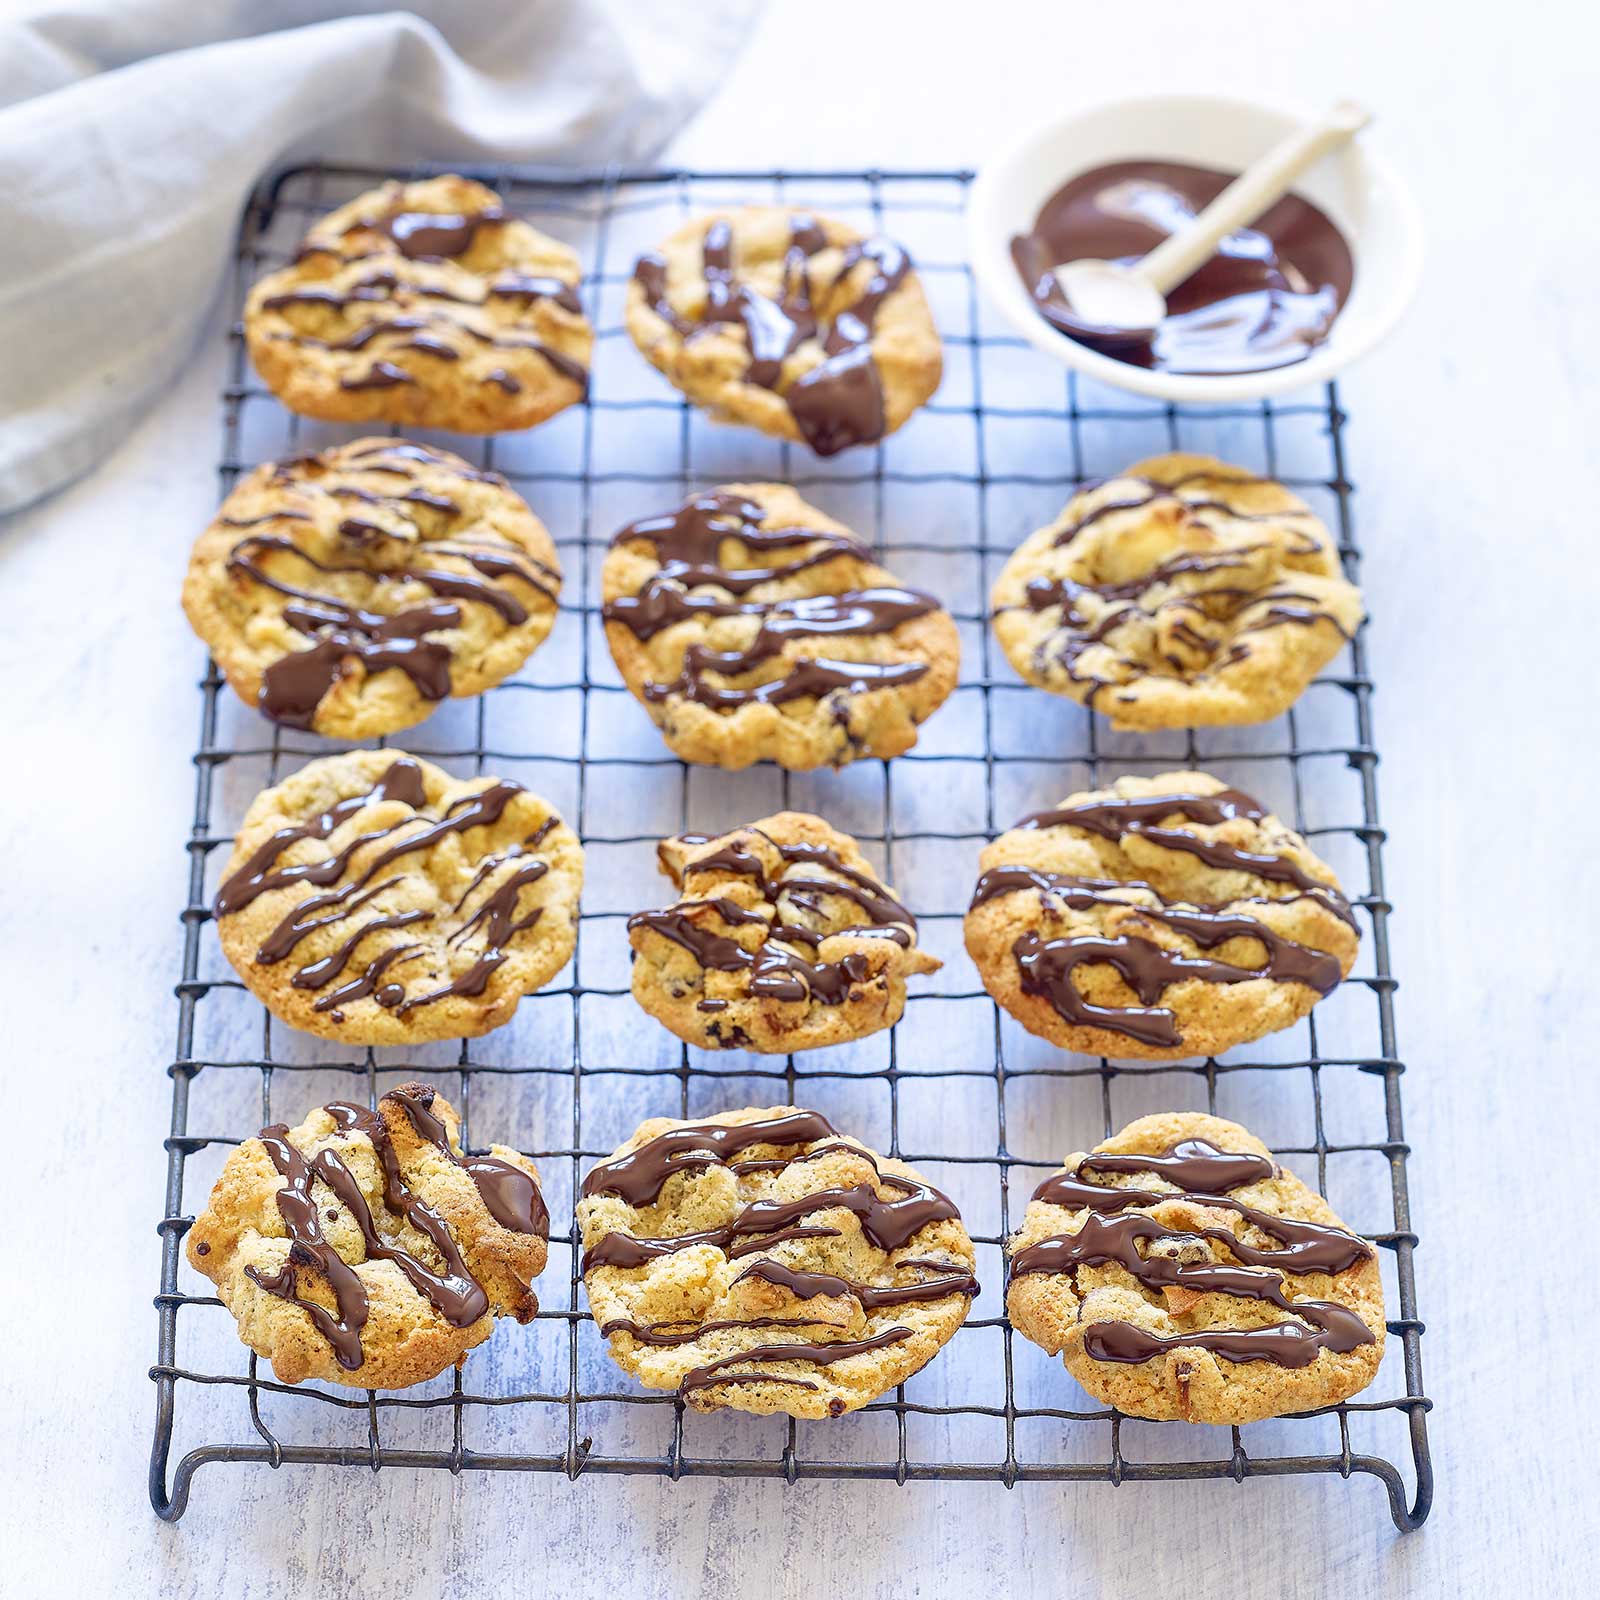 Gluten-free apple and walnut biscuits are arranged on a large wire rack. At the back is a small white bowl with melted chocolate and spoon. The chocolate has been drizzled over the top of the biscuits.